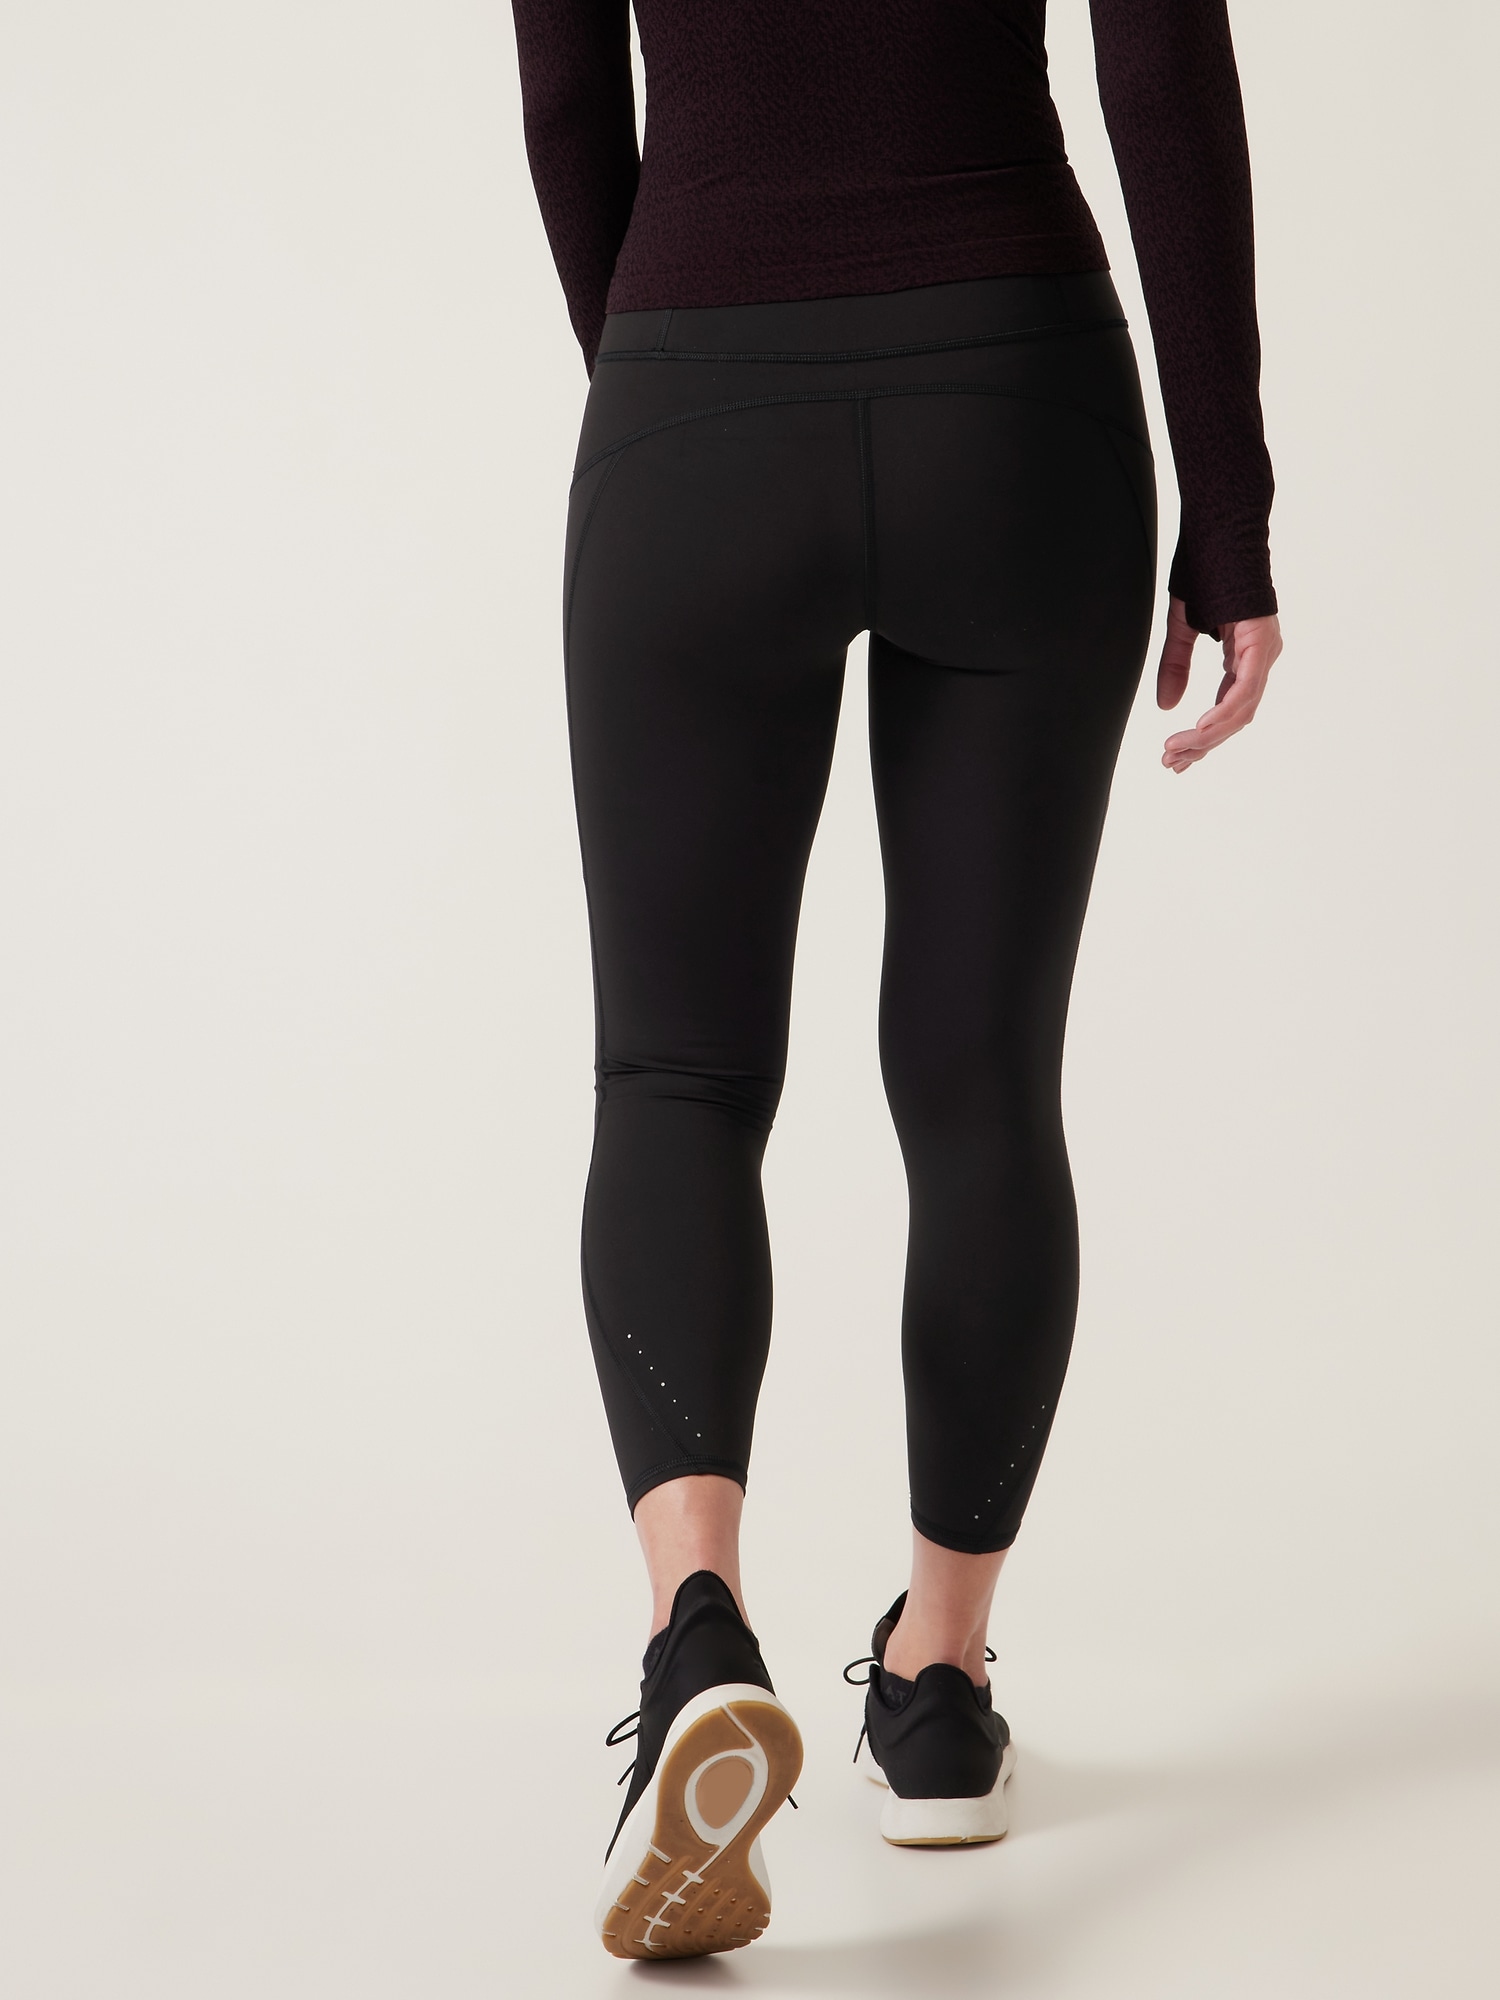 Athleta black full length leggings with side zip pockets size XS - $20 -  From Jean